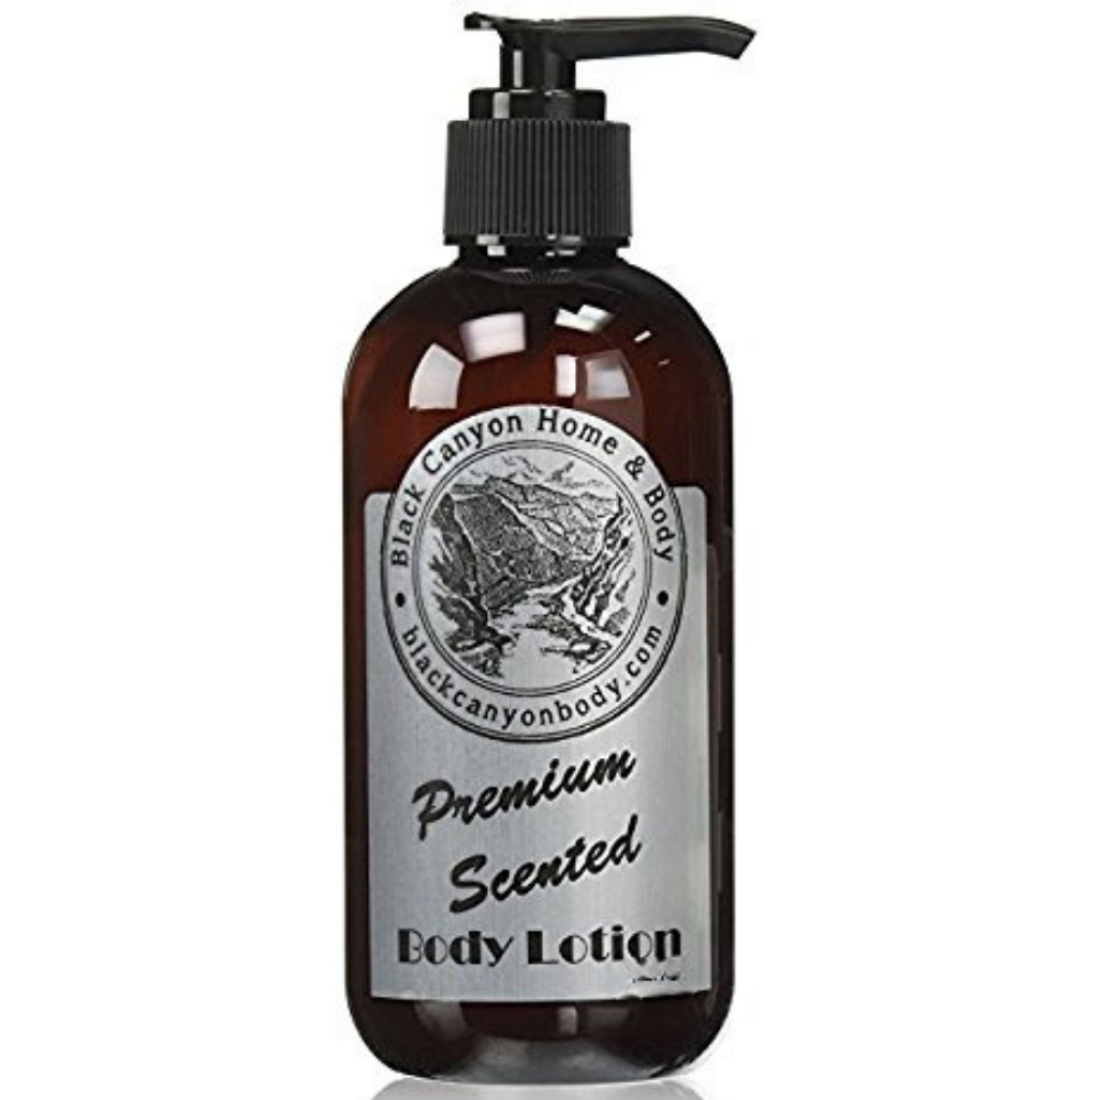 Black Canyon Berry Passion Scented Luxury Body Lotion with Lanolin and Jojoba Oil